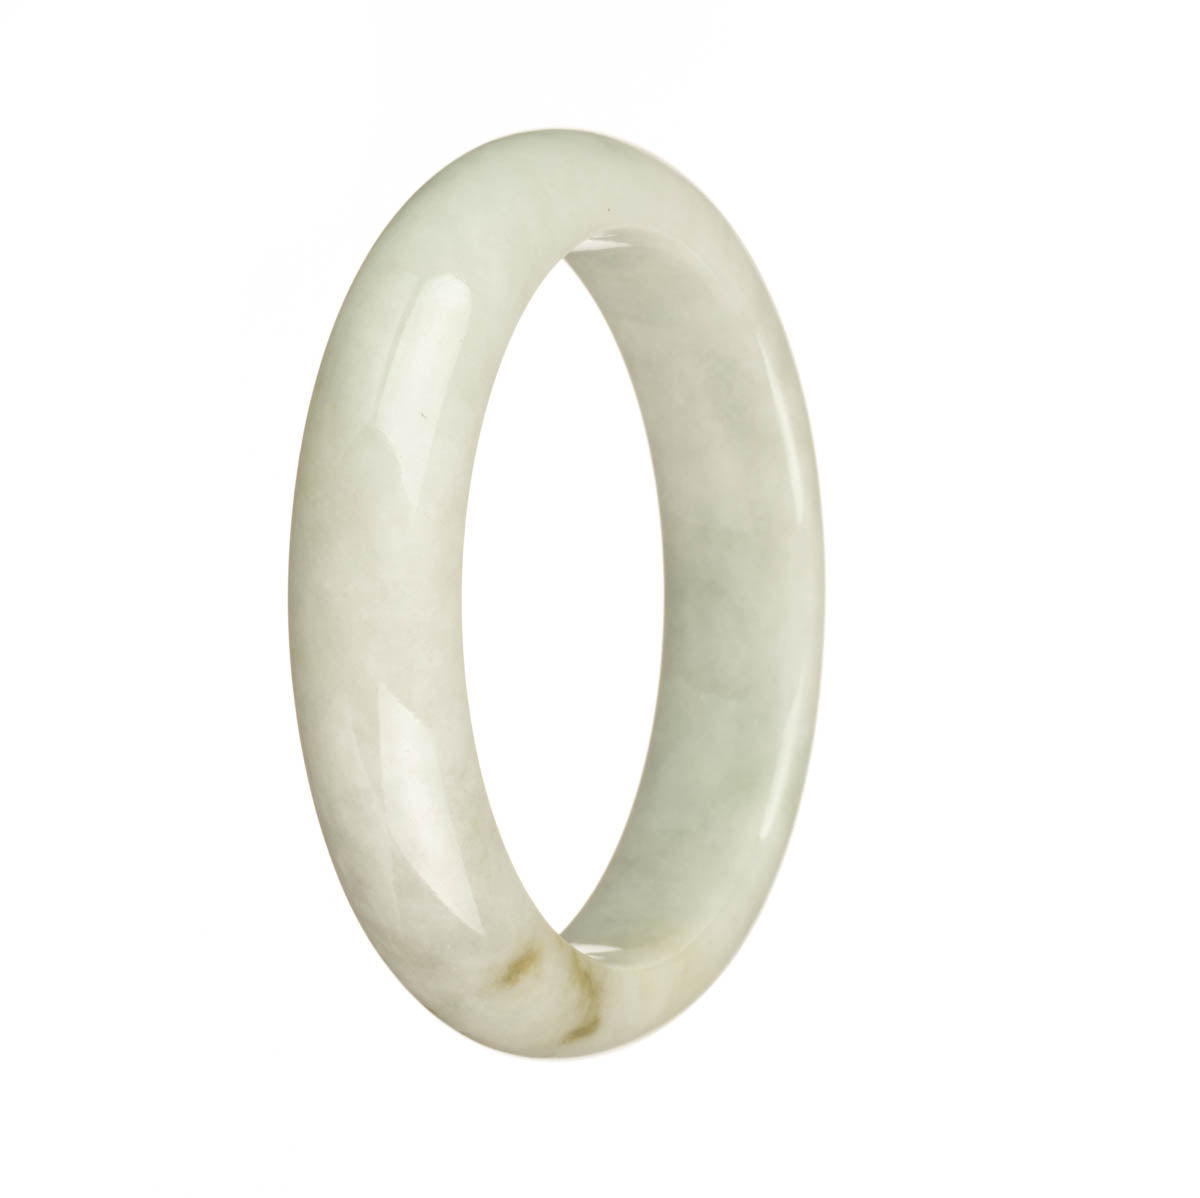 Genuine Grade A Greyish White with Brown Patches Traditional Jade Bangle Bracelet - 58mm Half Moon